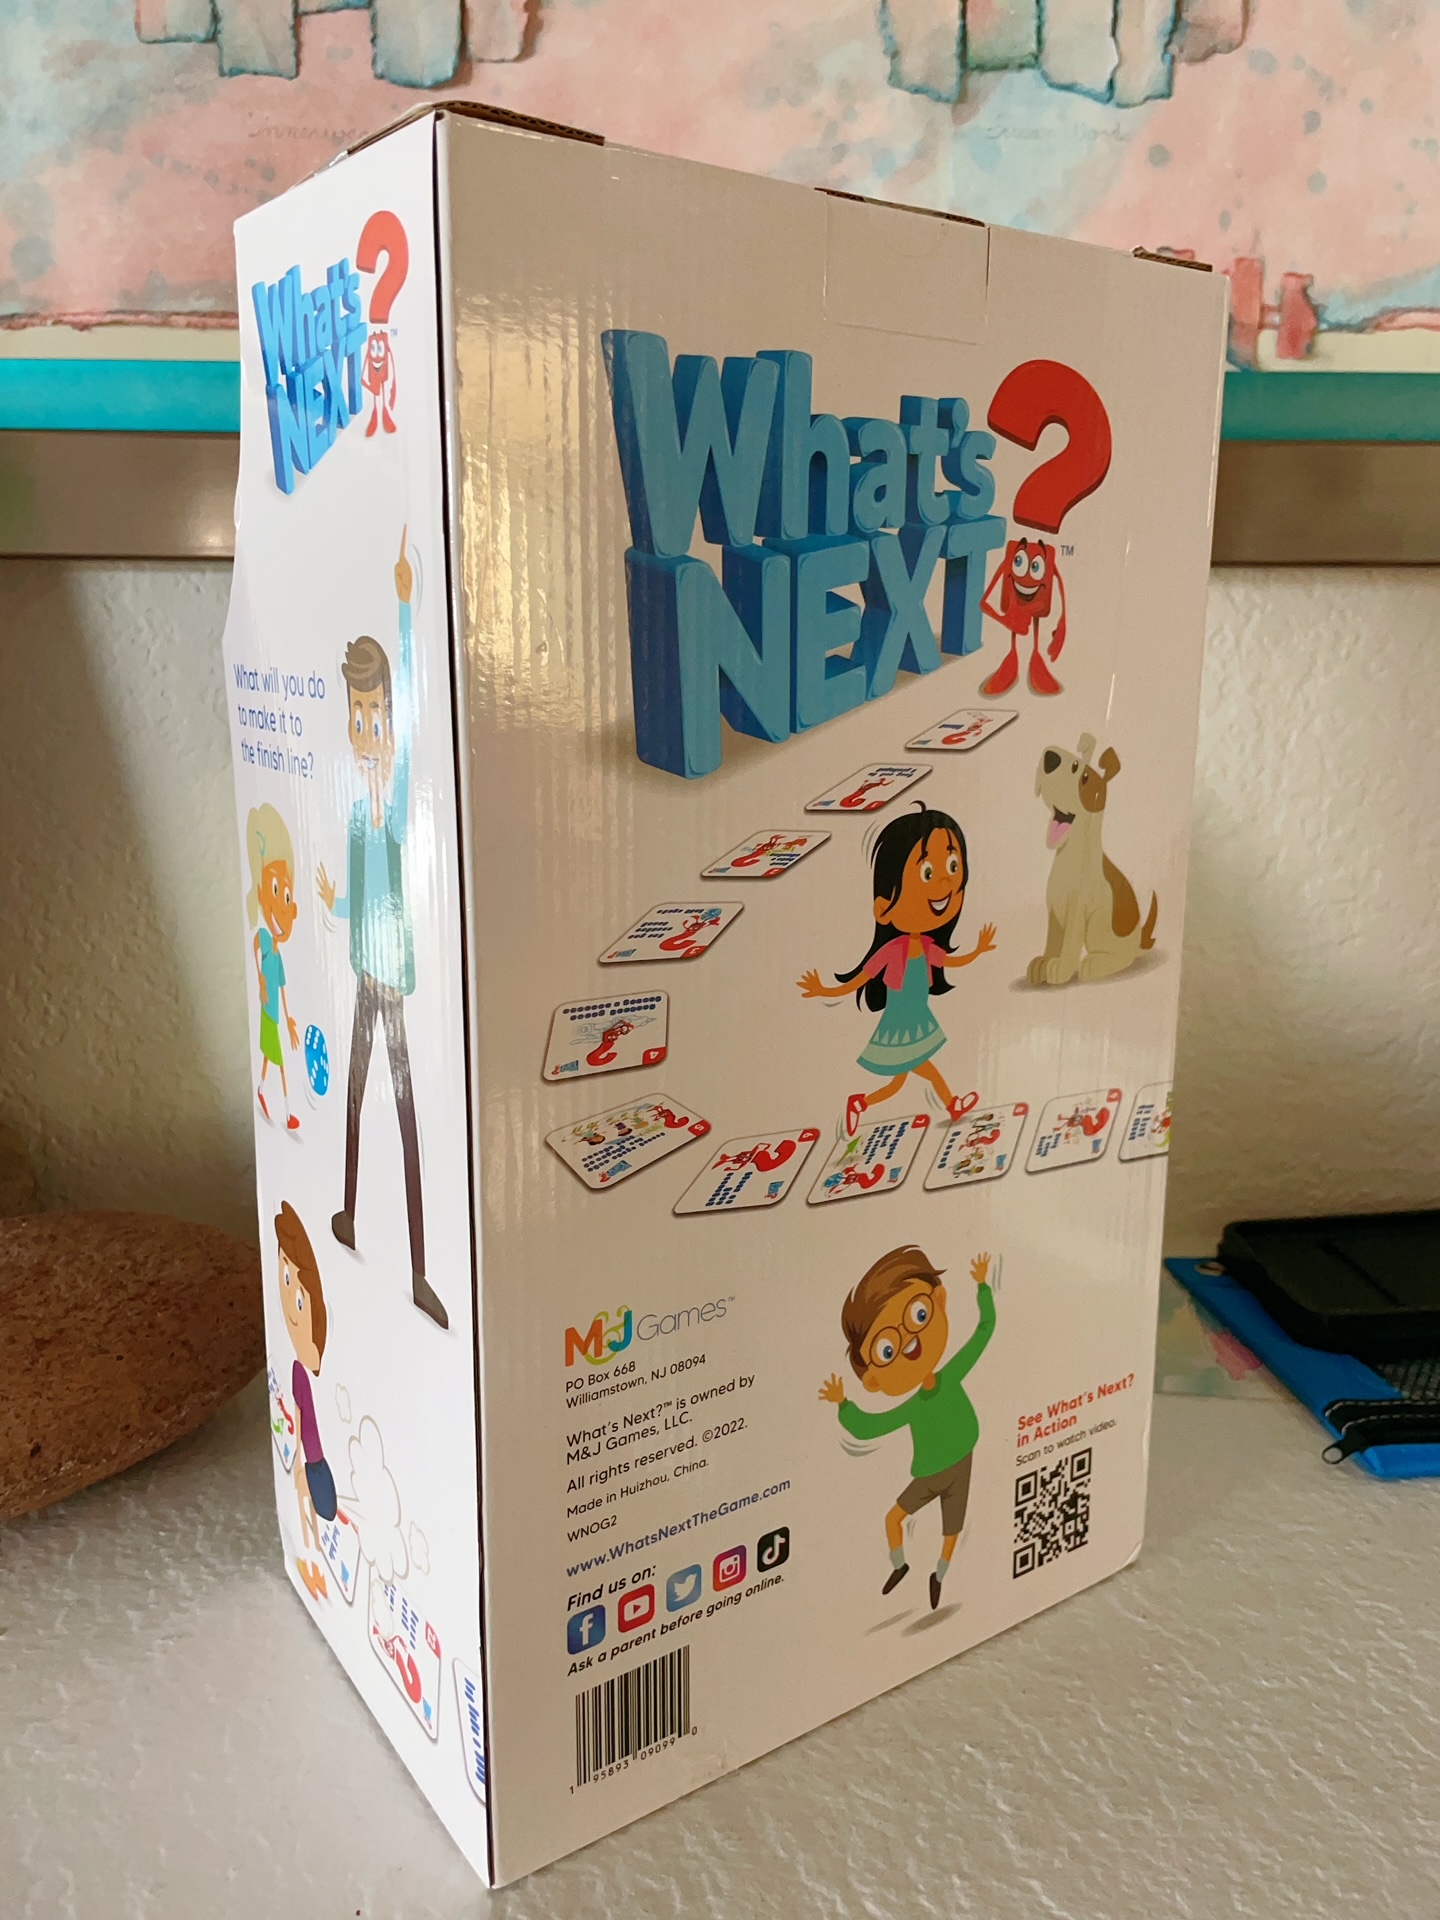 What's Next? A Life-Size Drinking Game – M&J Games, LLC